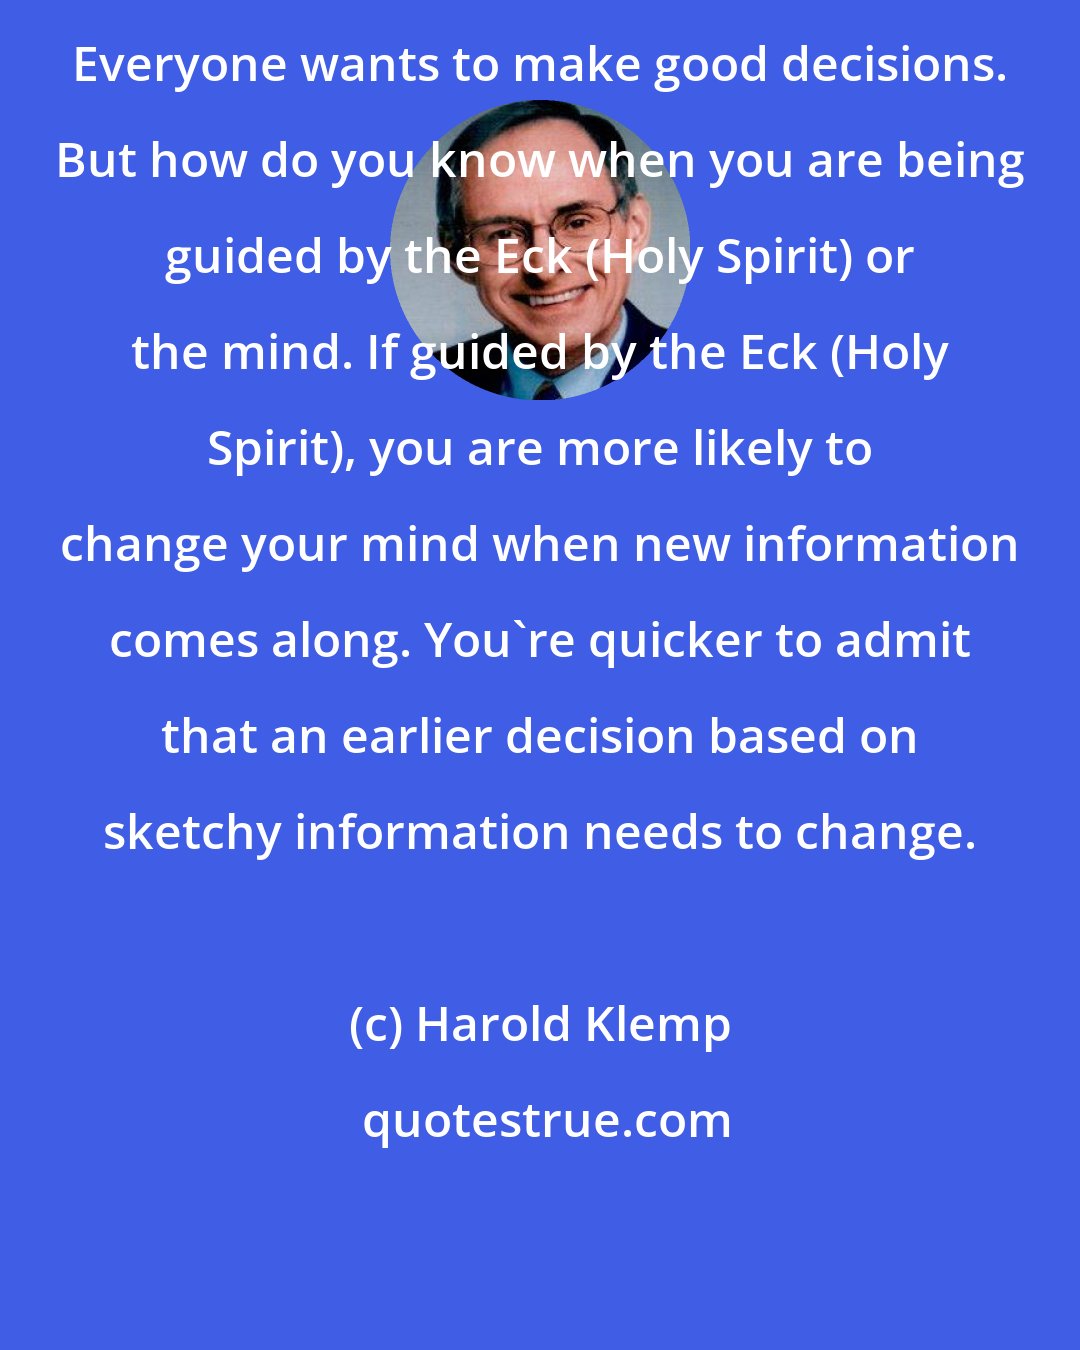 Harold Klemp: Everyone wants to make good decisions. But how do you know when you are being guided by the Eck (Holy Spirit) or the mind. If guided by the Eck (Holy Spirit), you are more likely to change your mind when new information comes along. You're quicker to admit that an earlier decision based on sketchy information needs to change.